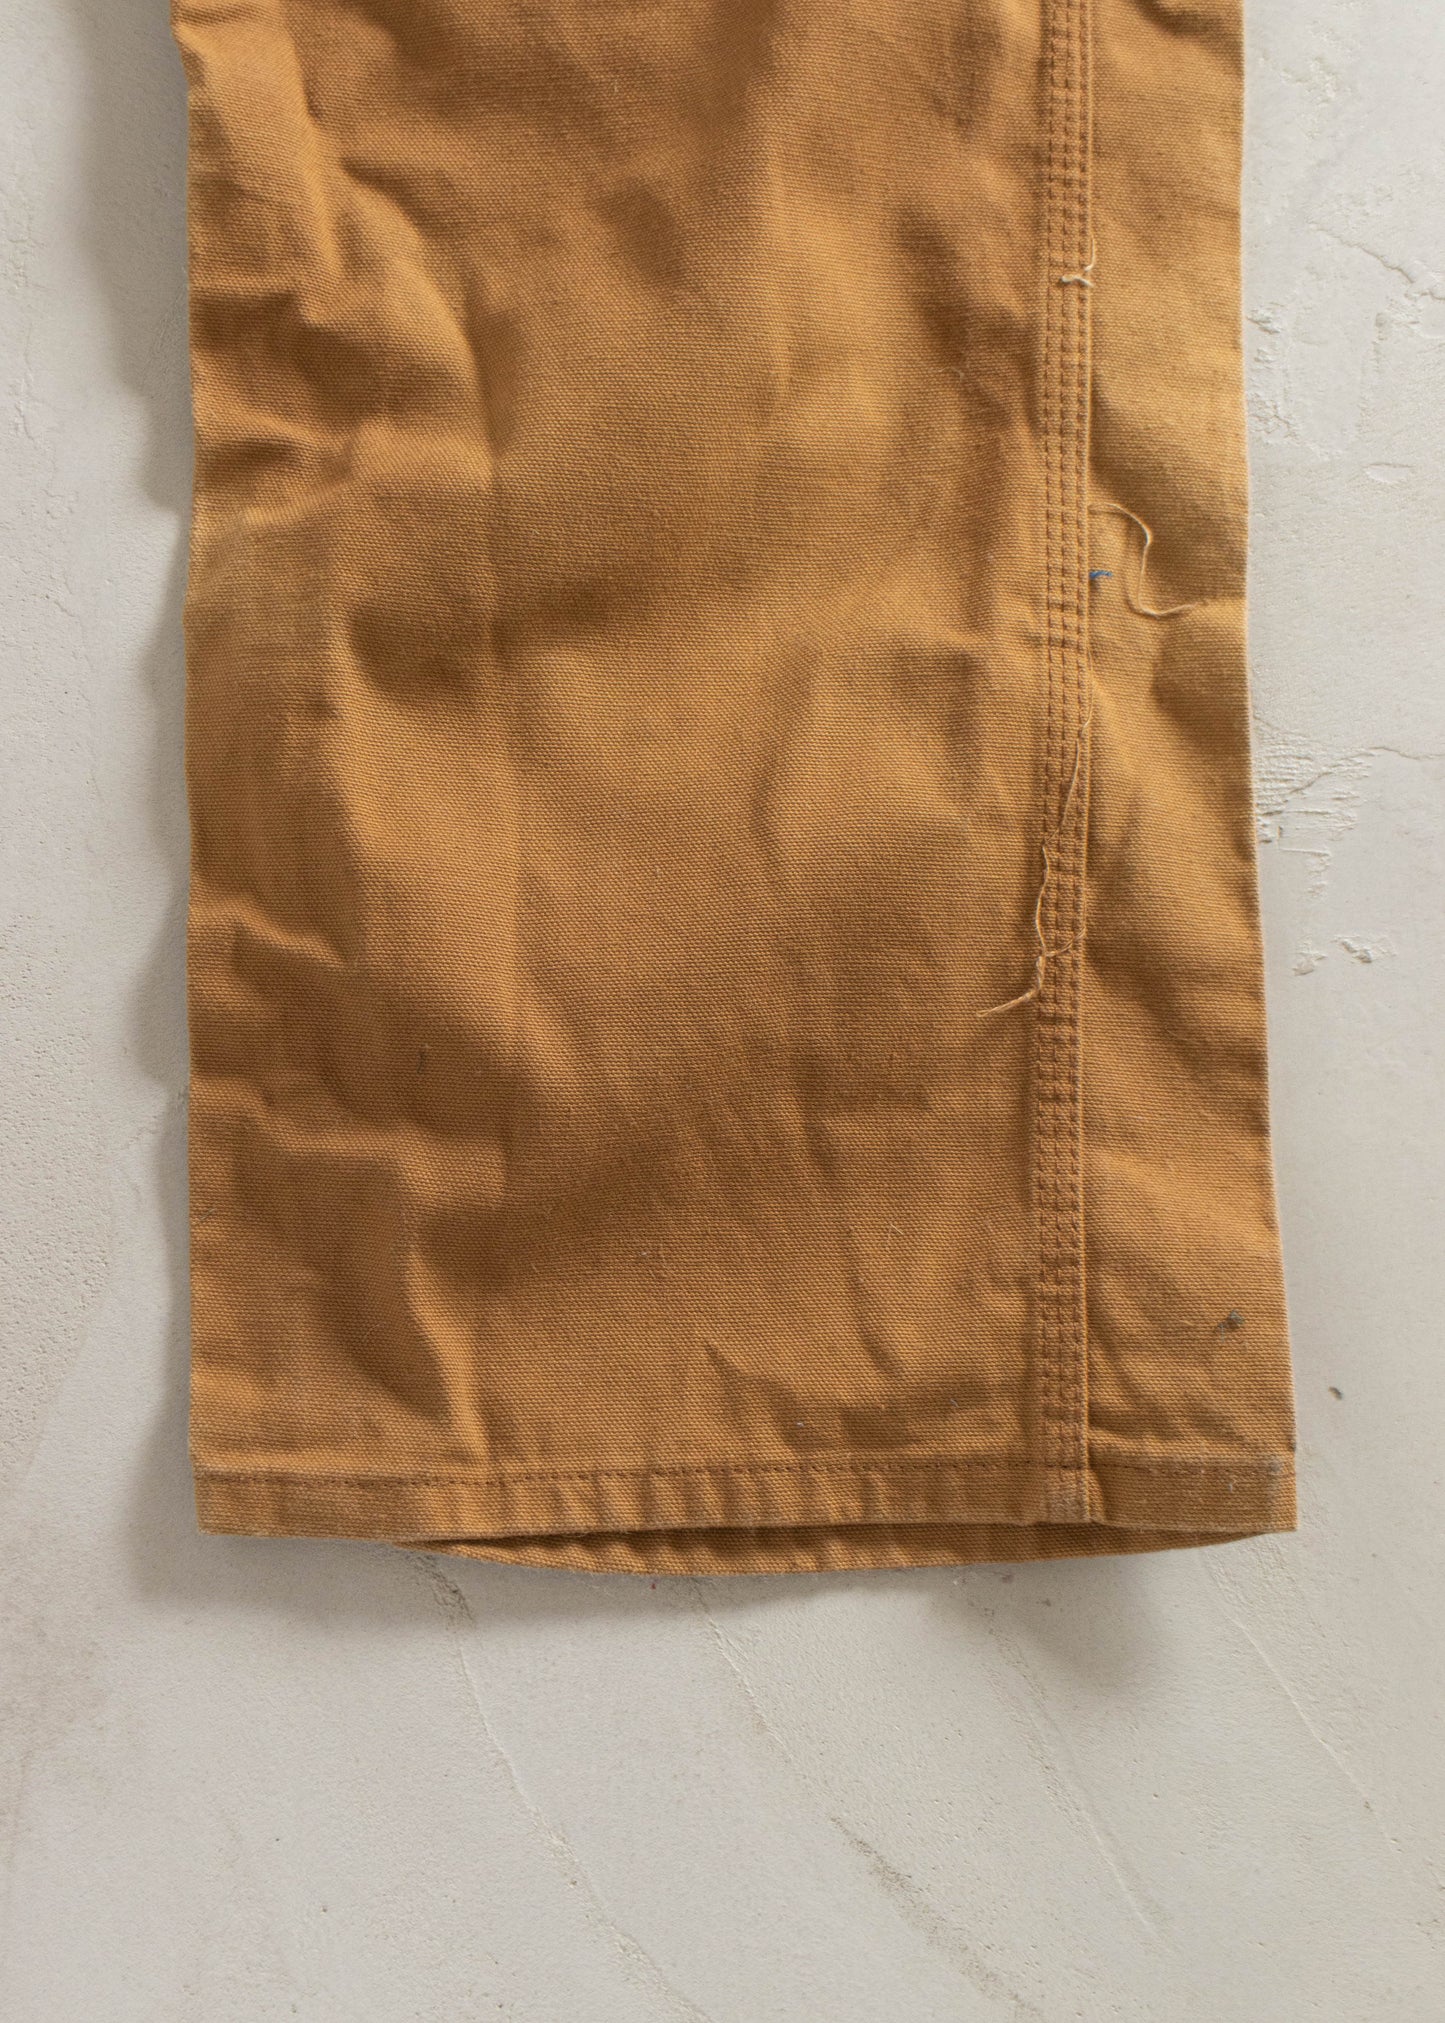 Dickies Duck Canvas Overalls Size L/XL